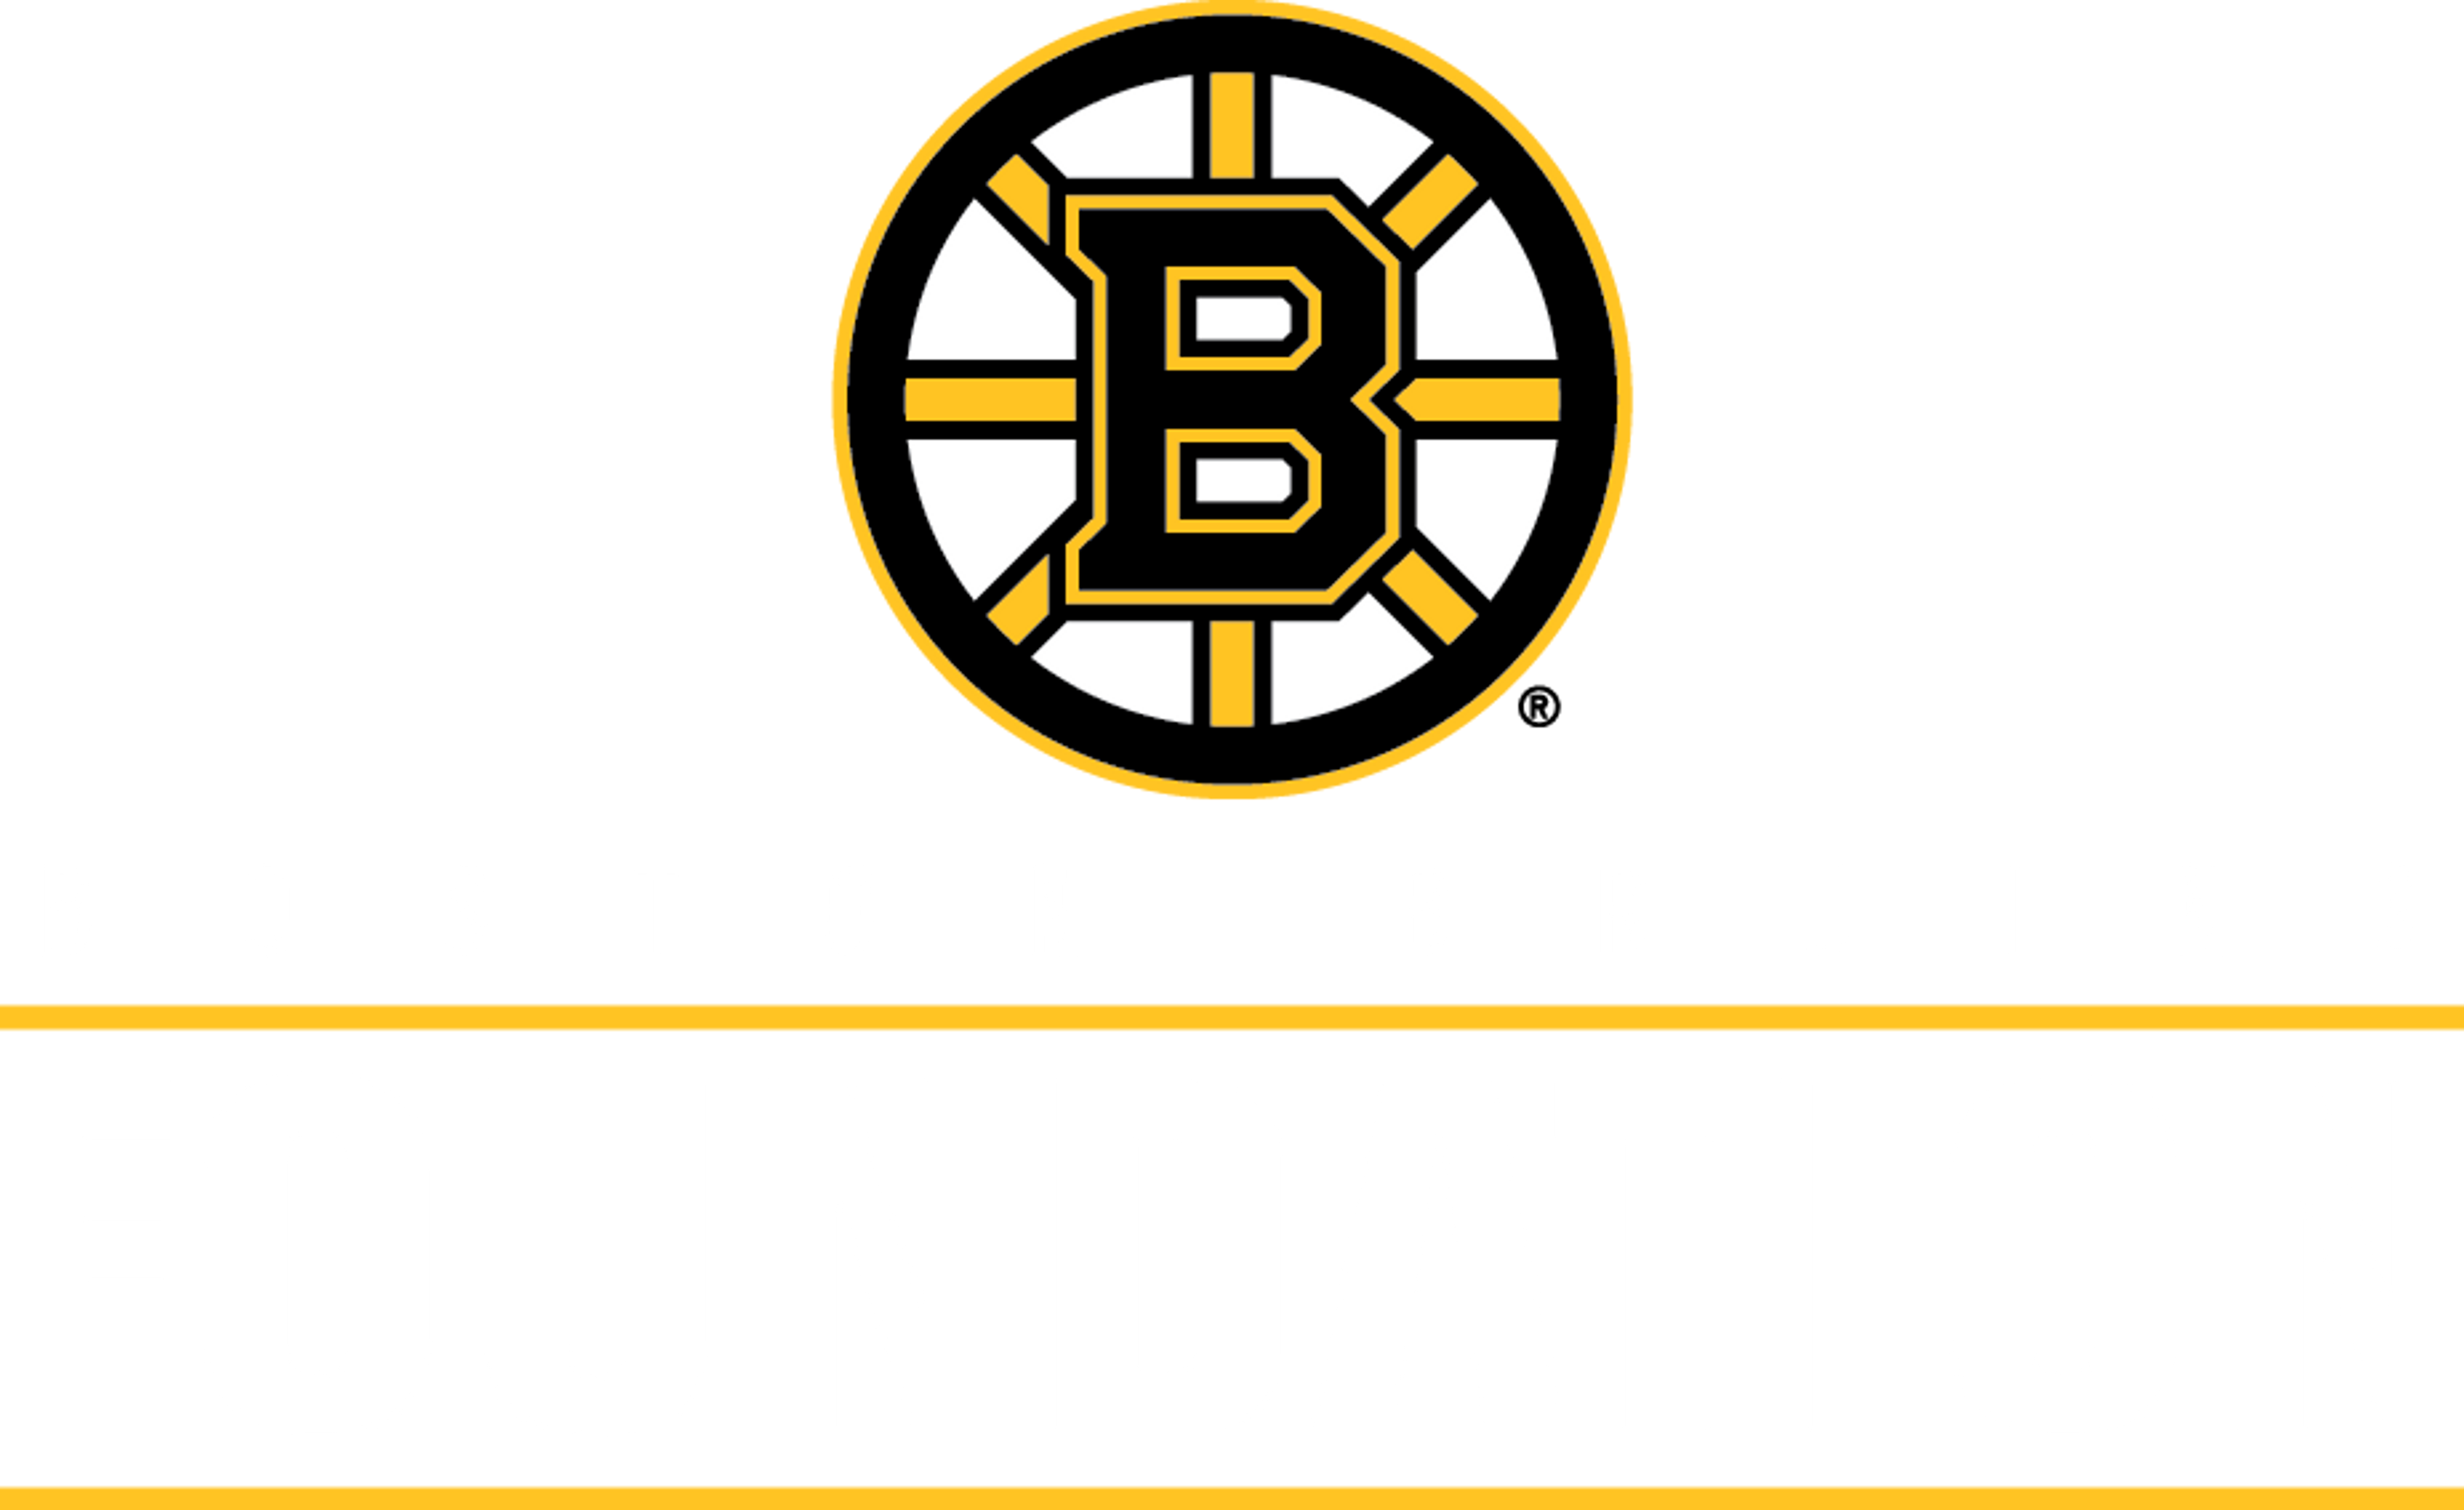 4 Suite Tickets for February 17th Bruins vs. Kings Game logo image